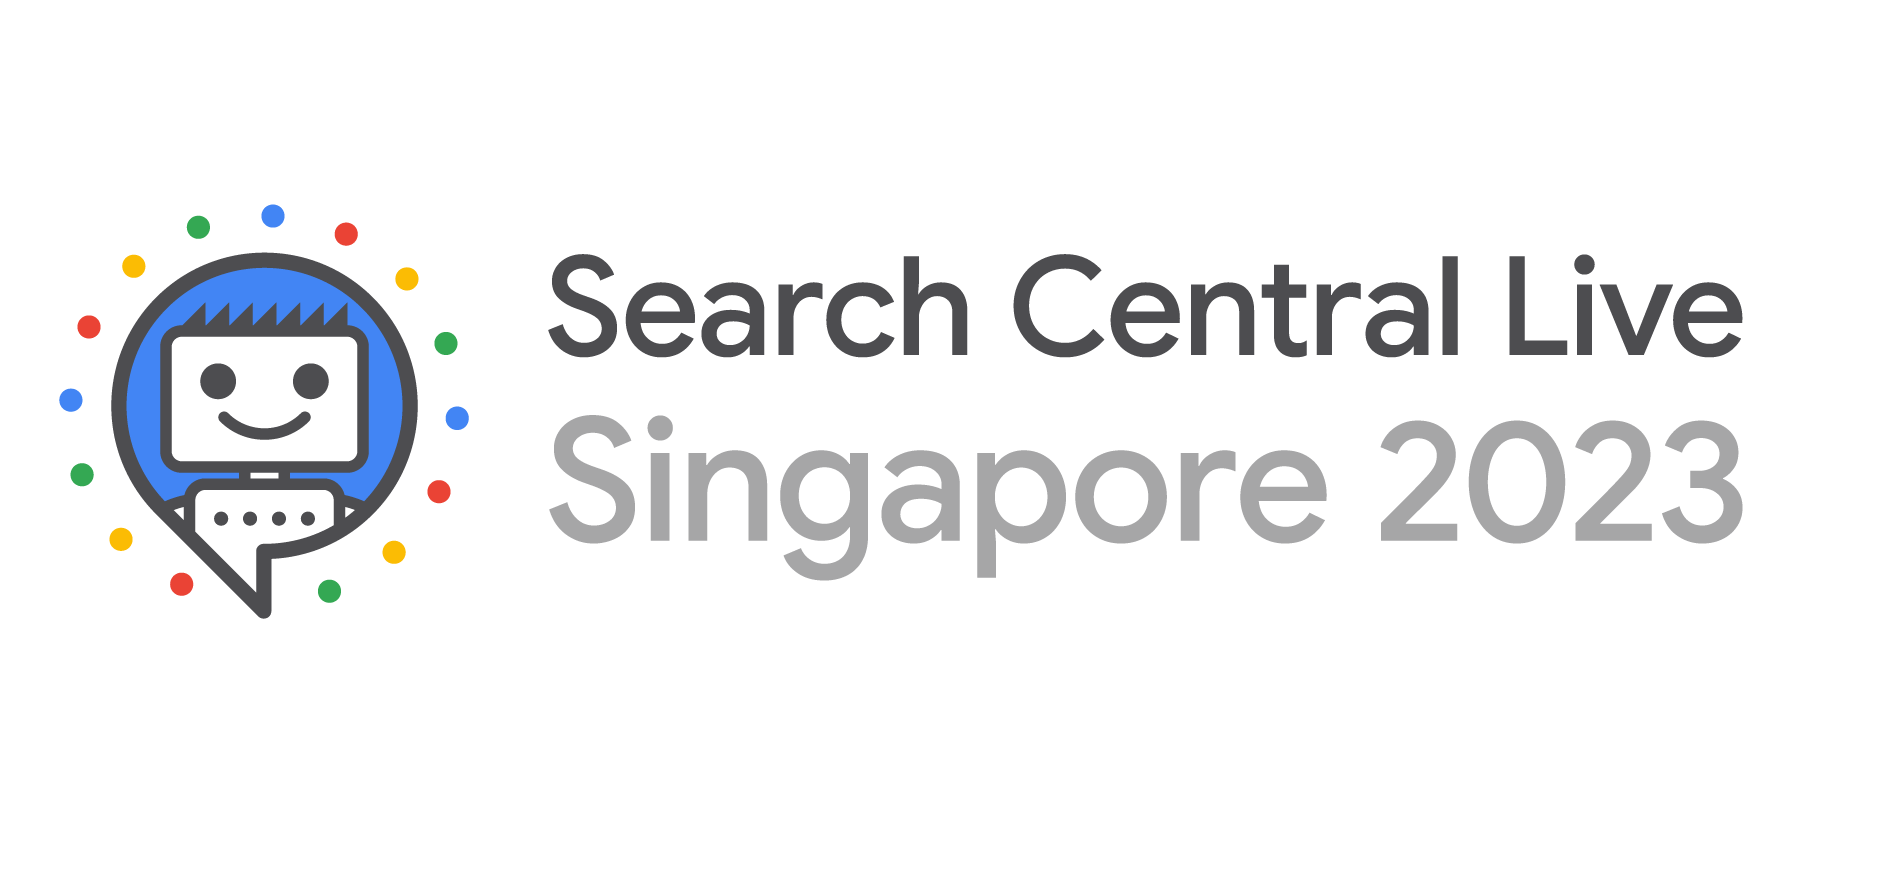 Search Central Live Singapore 2023 のロゴ